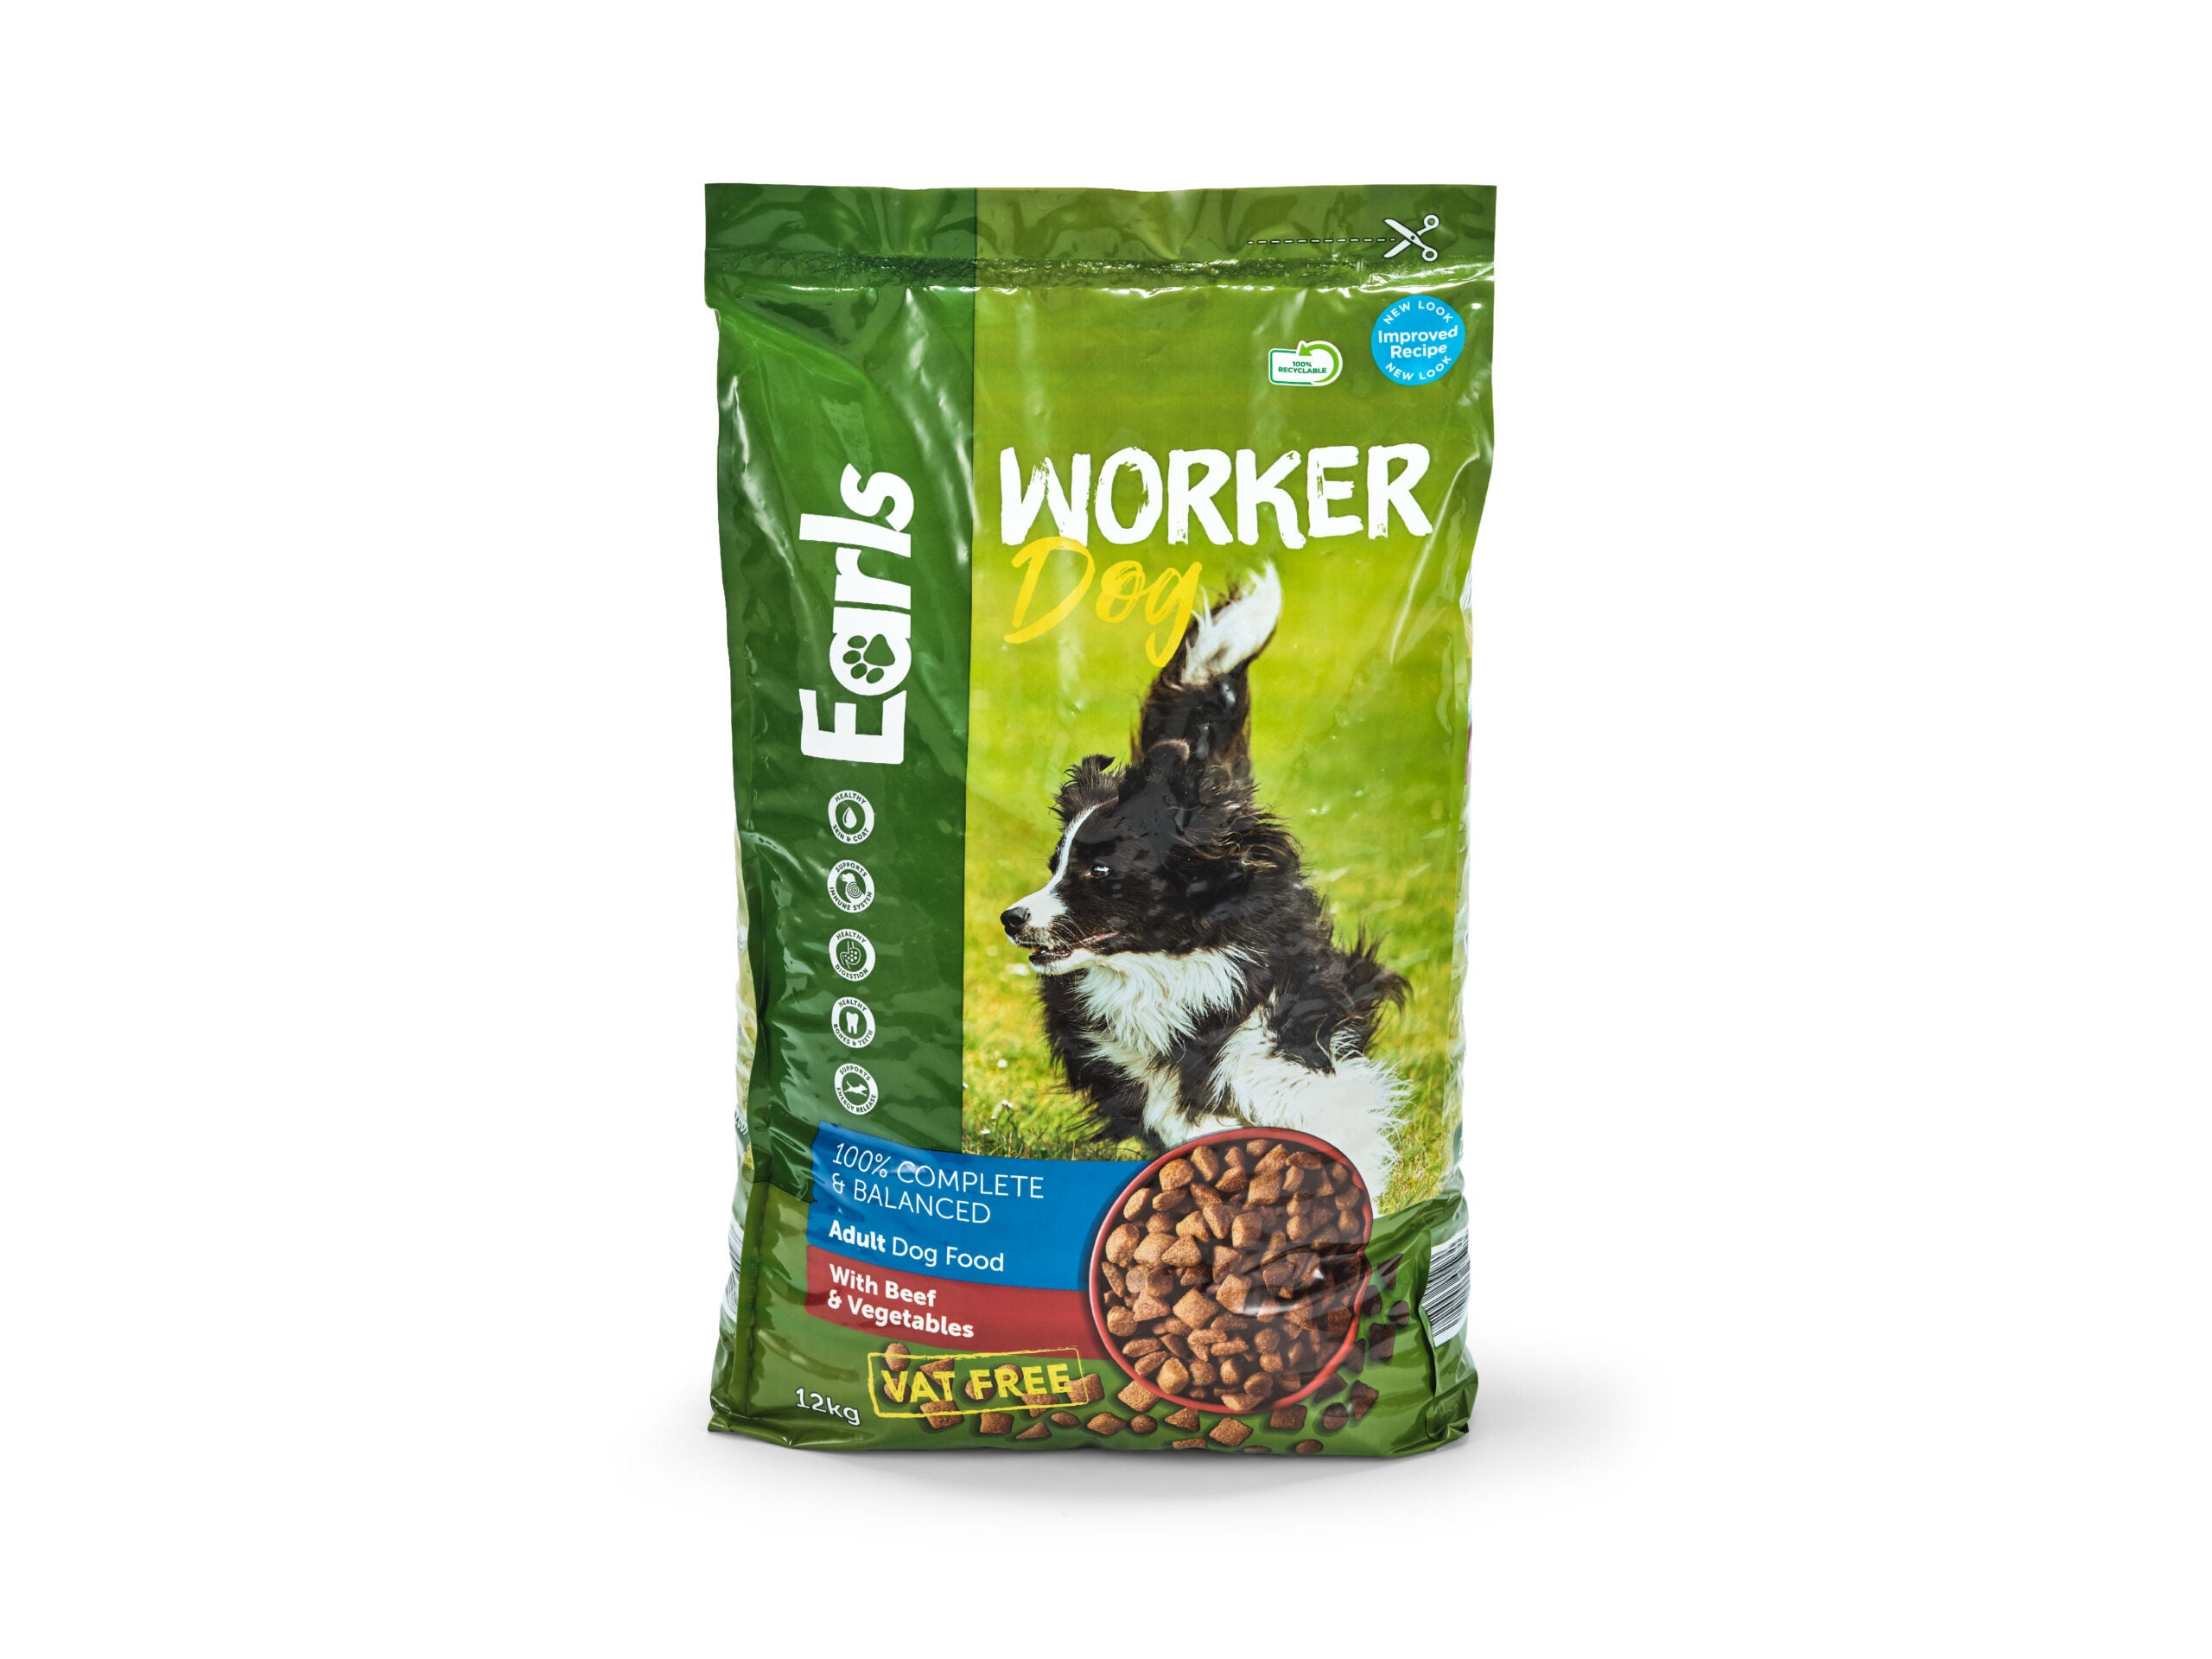 Coveris introduces recyclable PE bags for Irish Dog Food